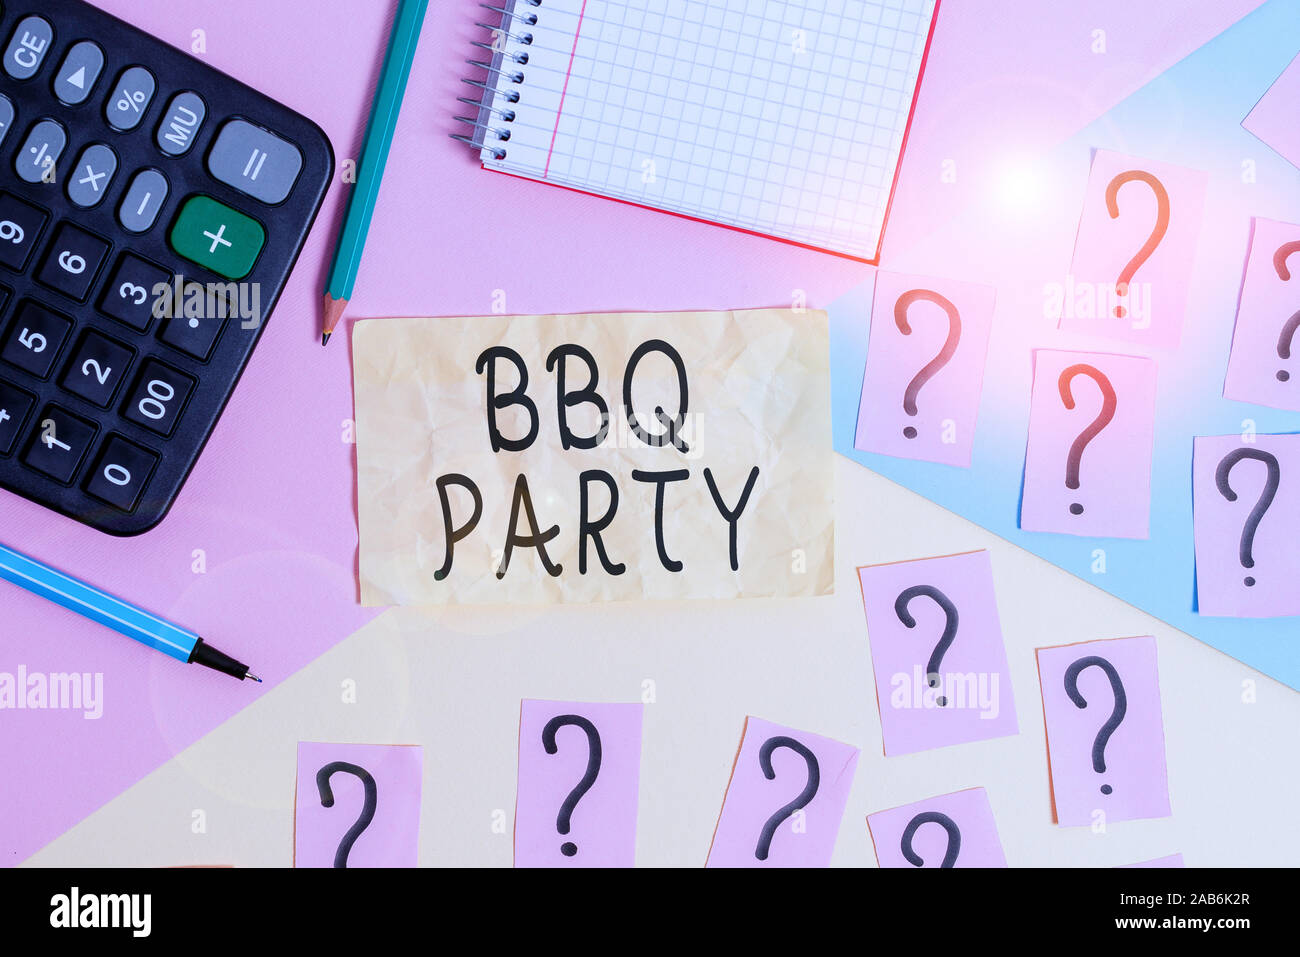 BBQ Party Calculator